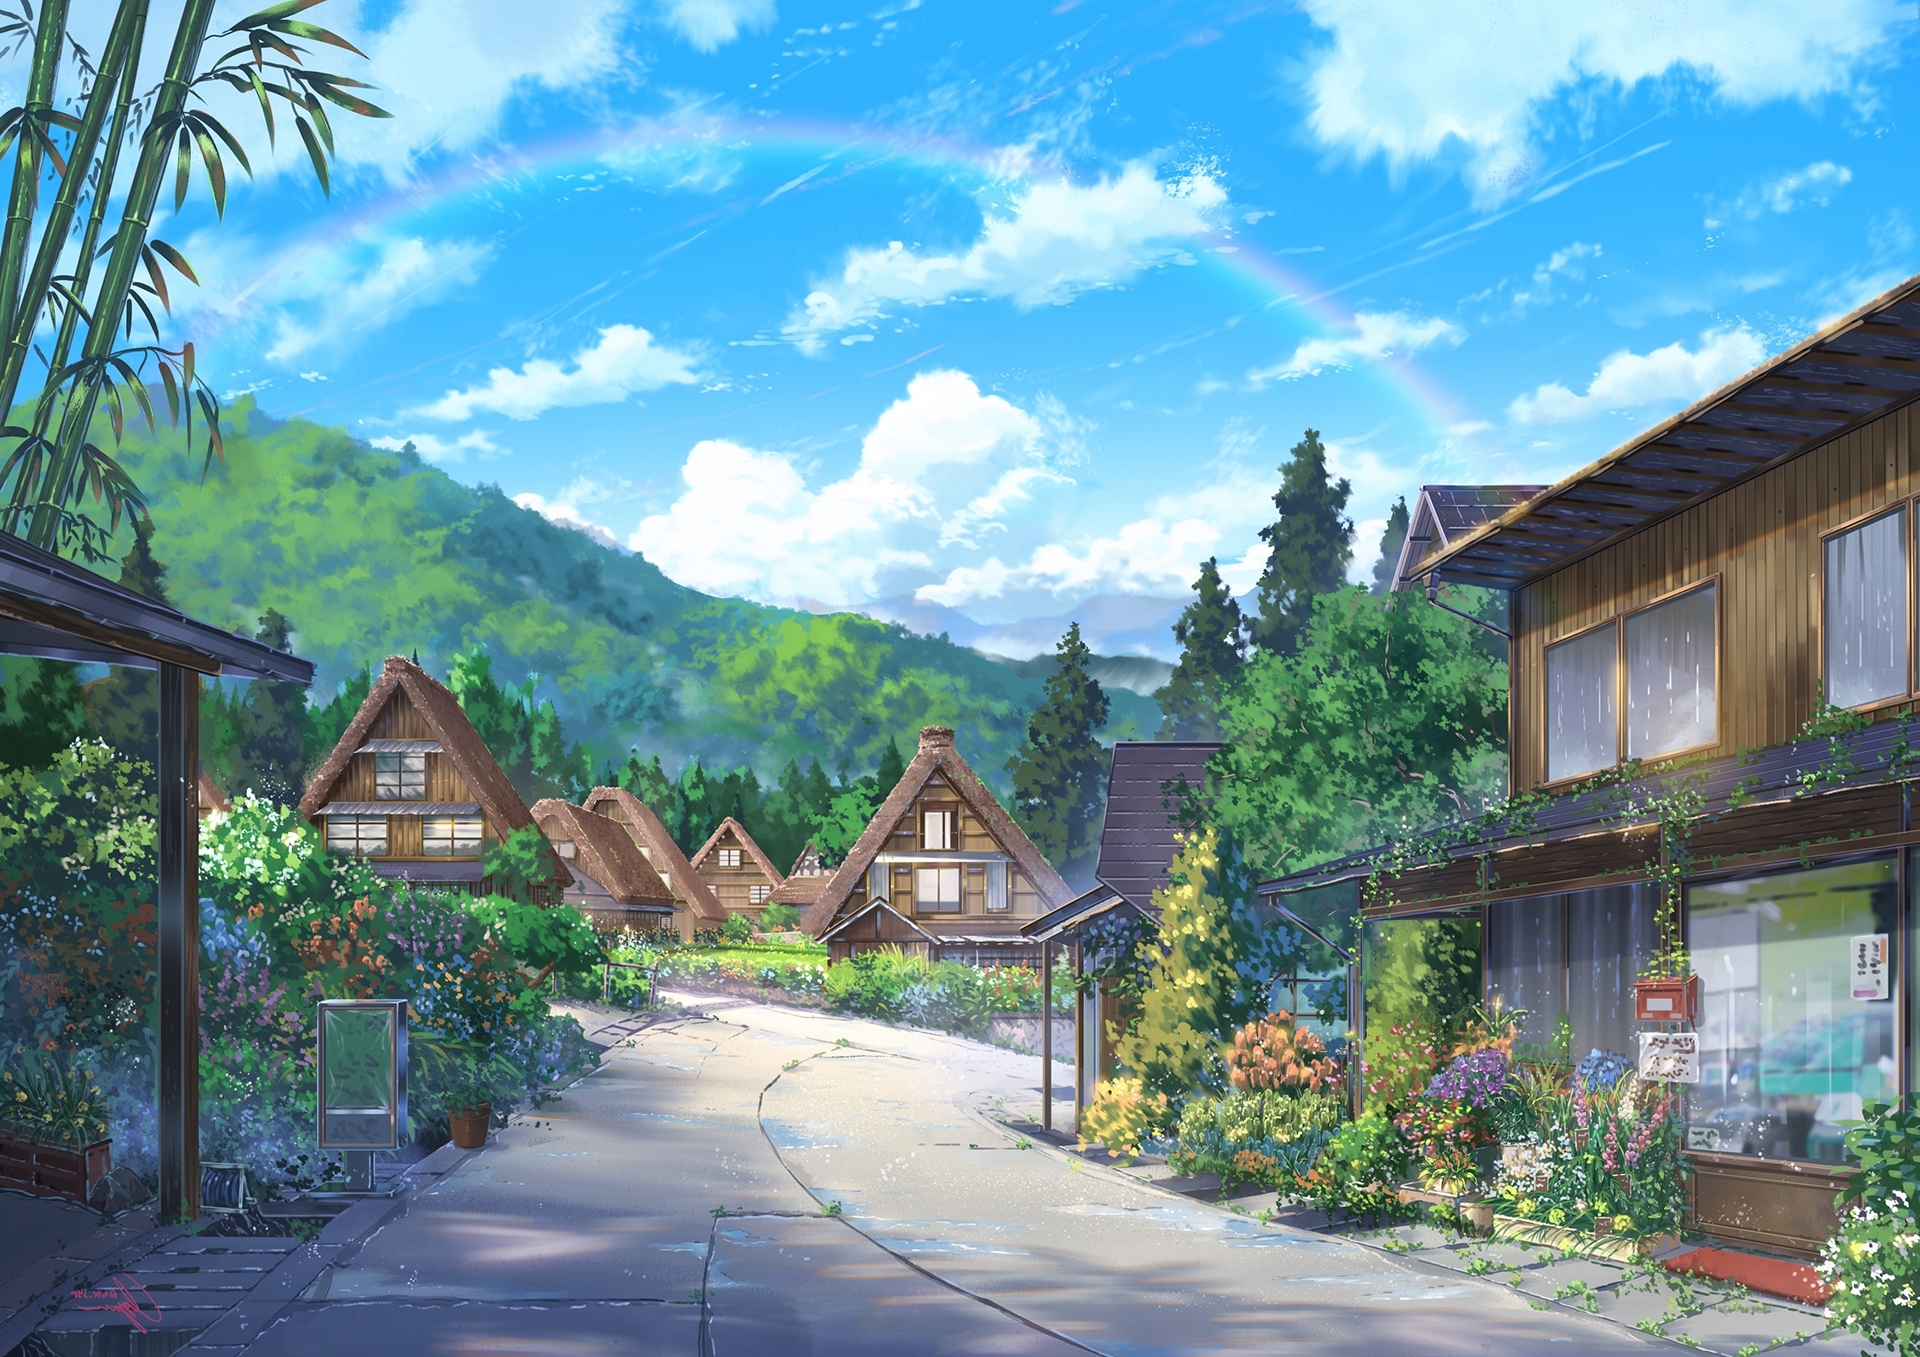 Anime Concept Background Countryside 3D Environment Illustration | JPG Free  Download - Pikbest